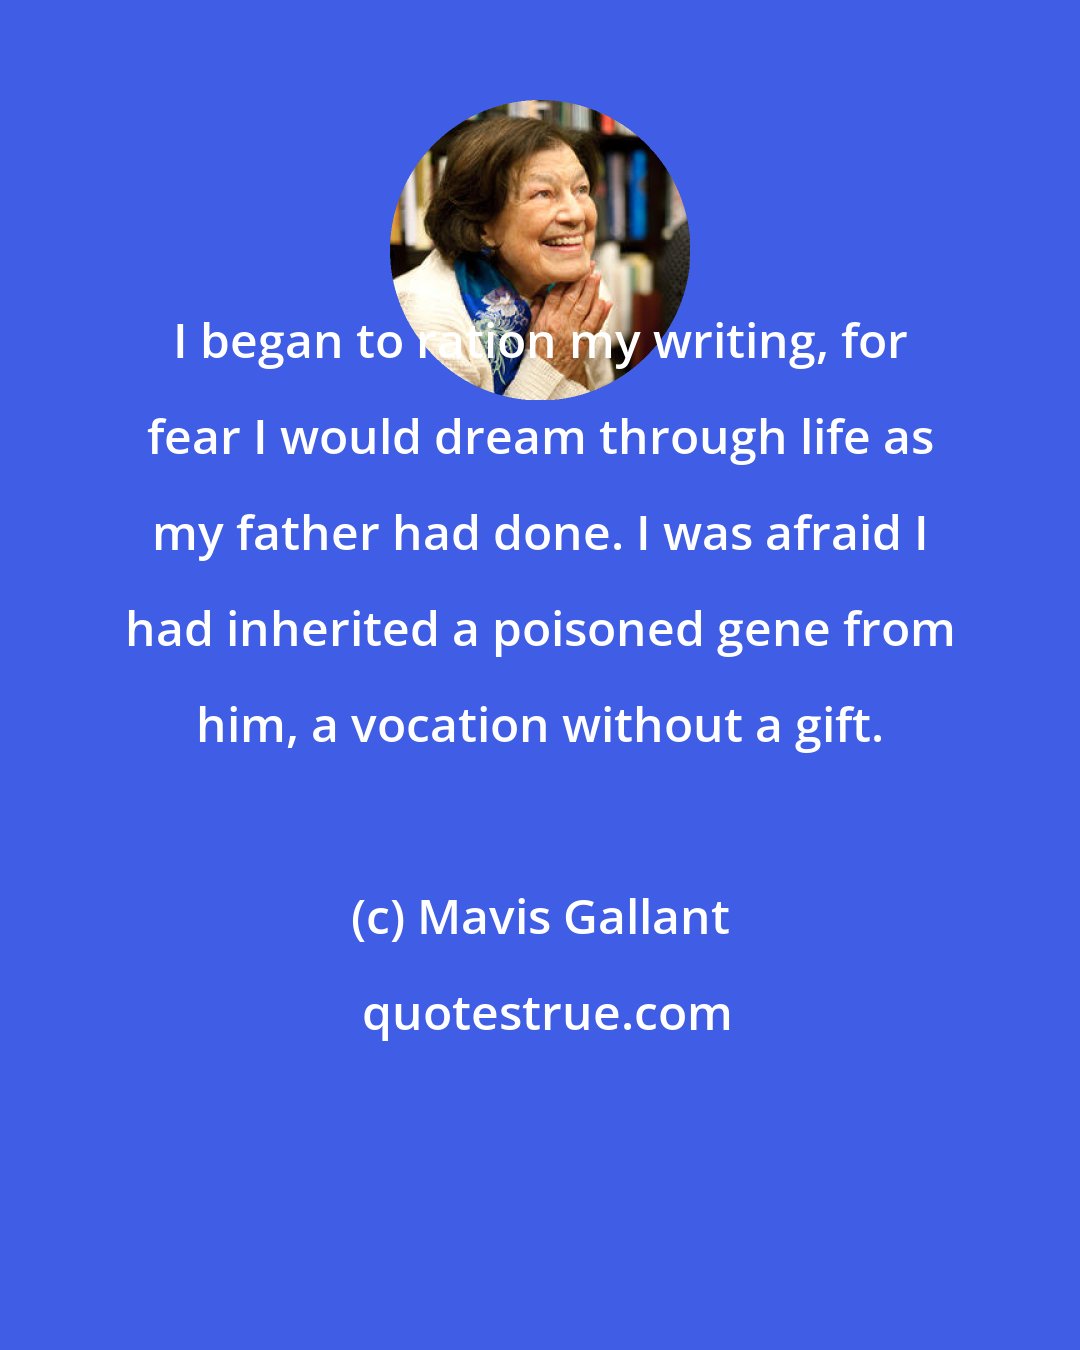 Mavis Gallant: I began to ration my writing, for fear I would dream through life as my father had done. I was afraid I had inherited a poisoned gene from him, a vocation without a gift.